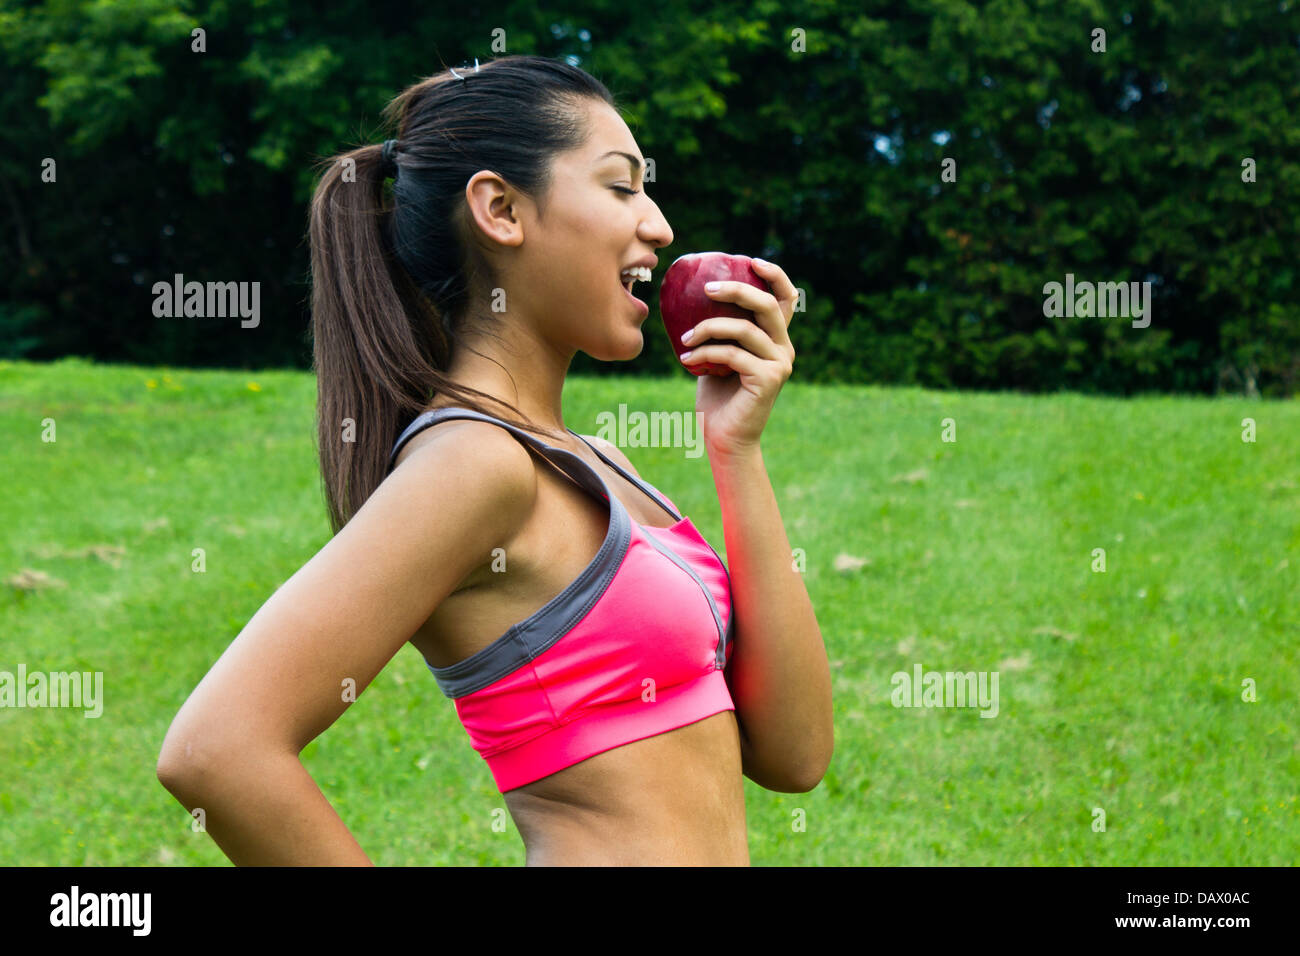 Fit young woman eating an apple Banque D'Images